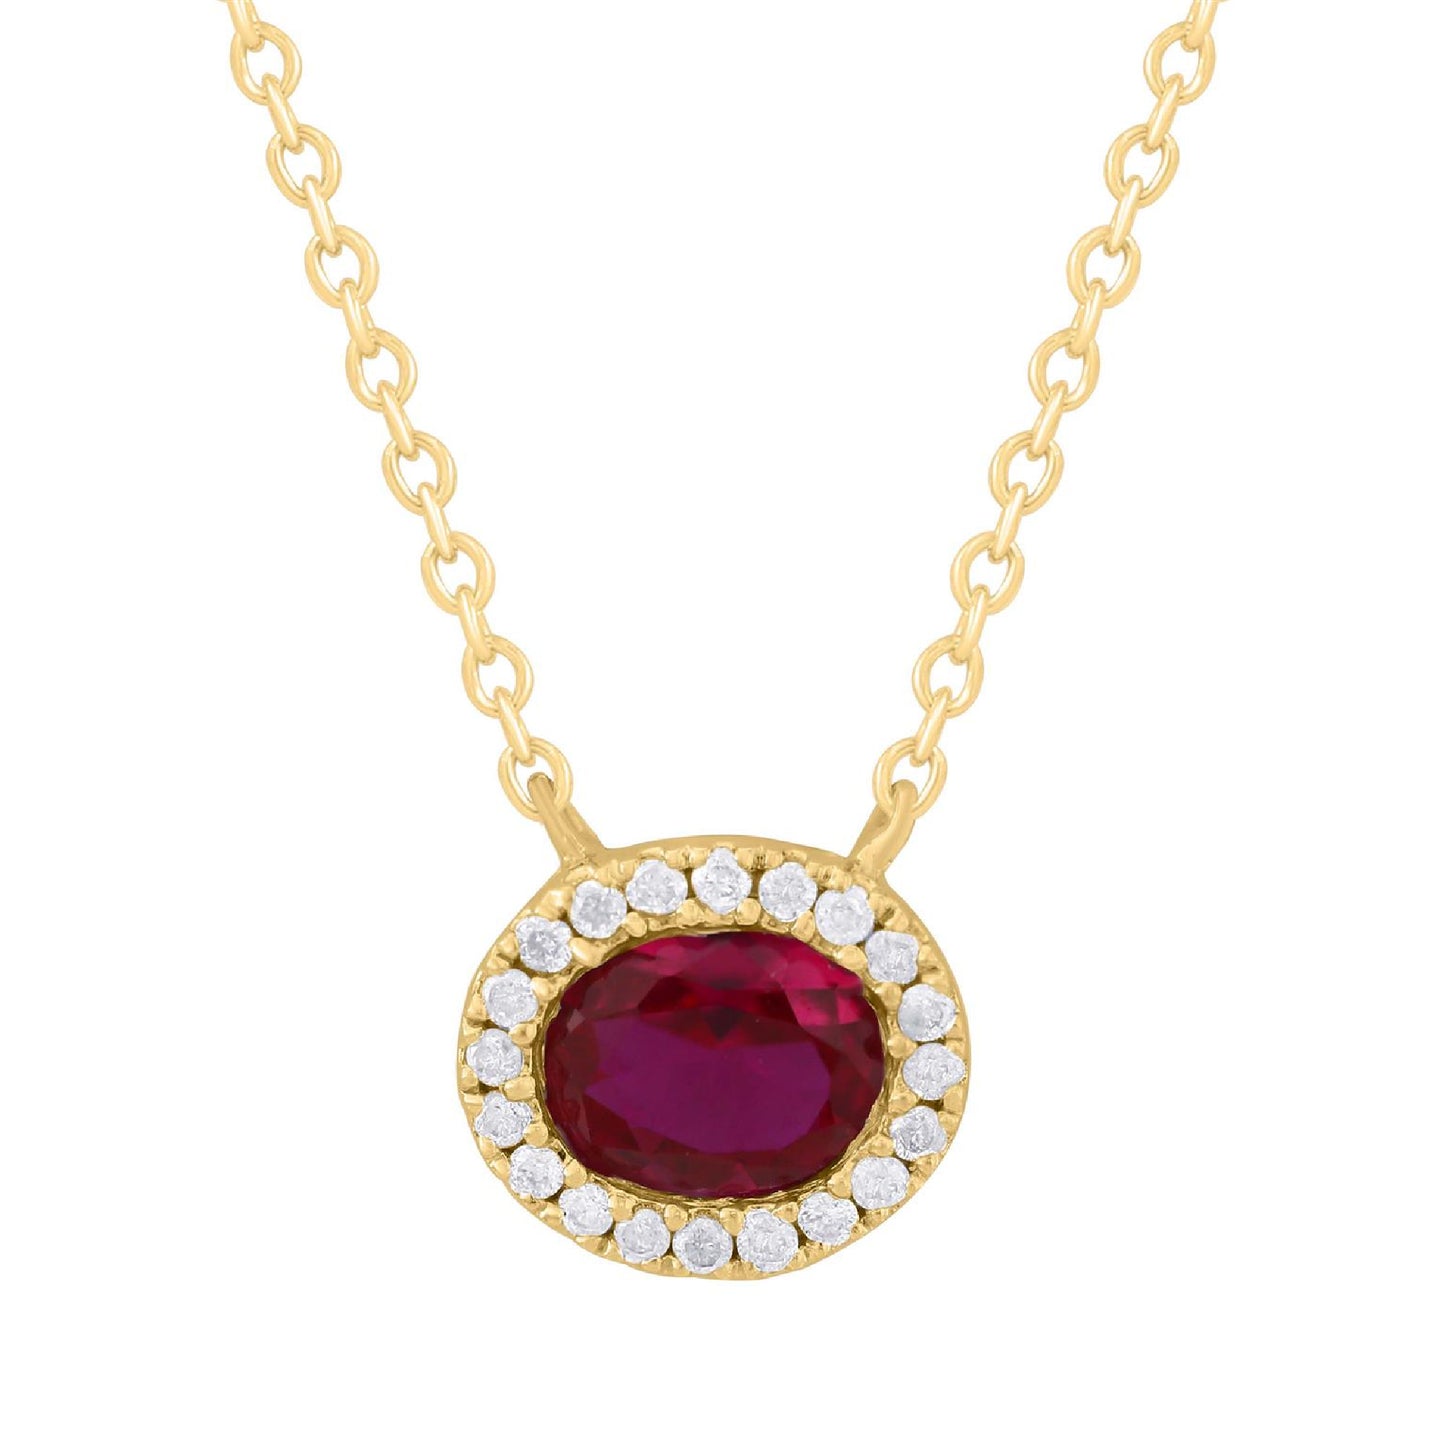 Oval Diamond Pendant with Color Stone in the Middle